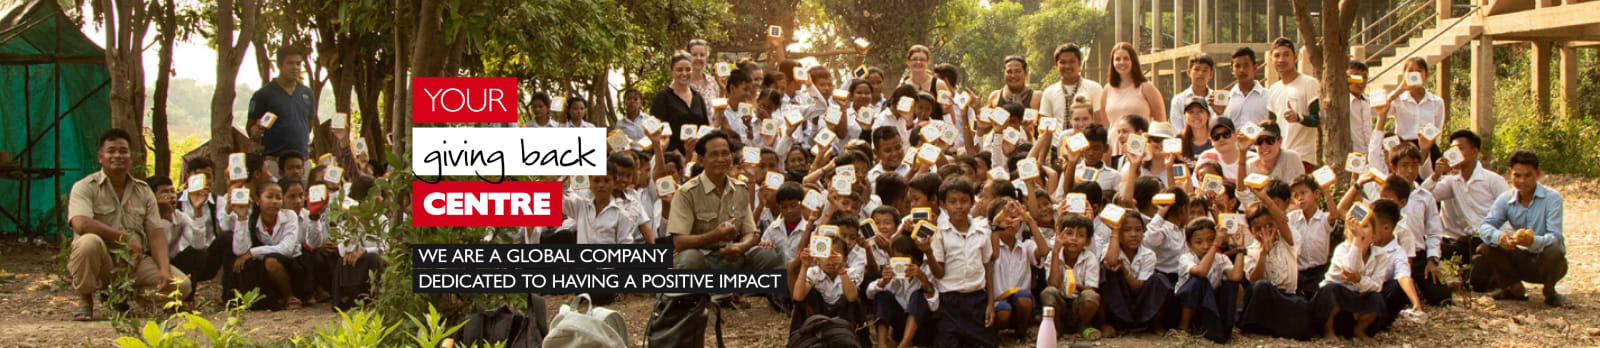 Your giving back centre - we are a global company dedicated to having a positive impact. Group of multi-racial students and teachers holding papers in the air framed by trees and a school building